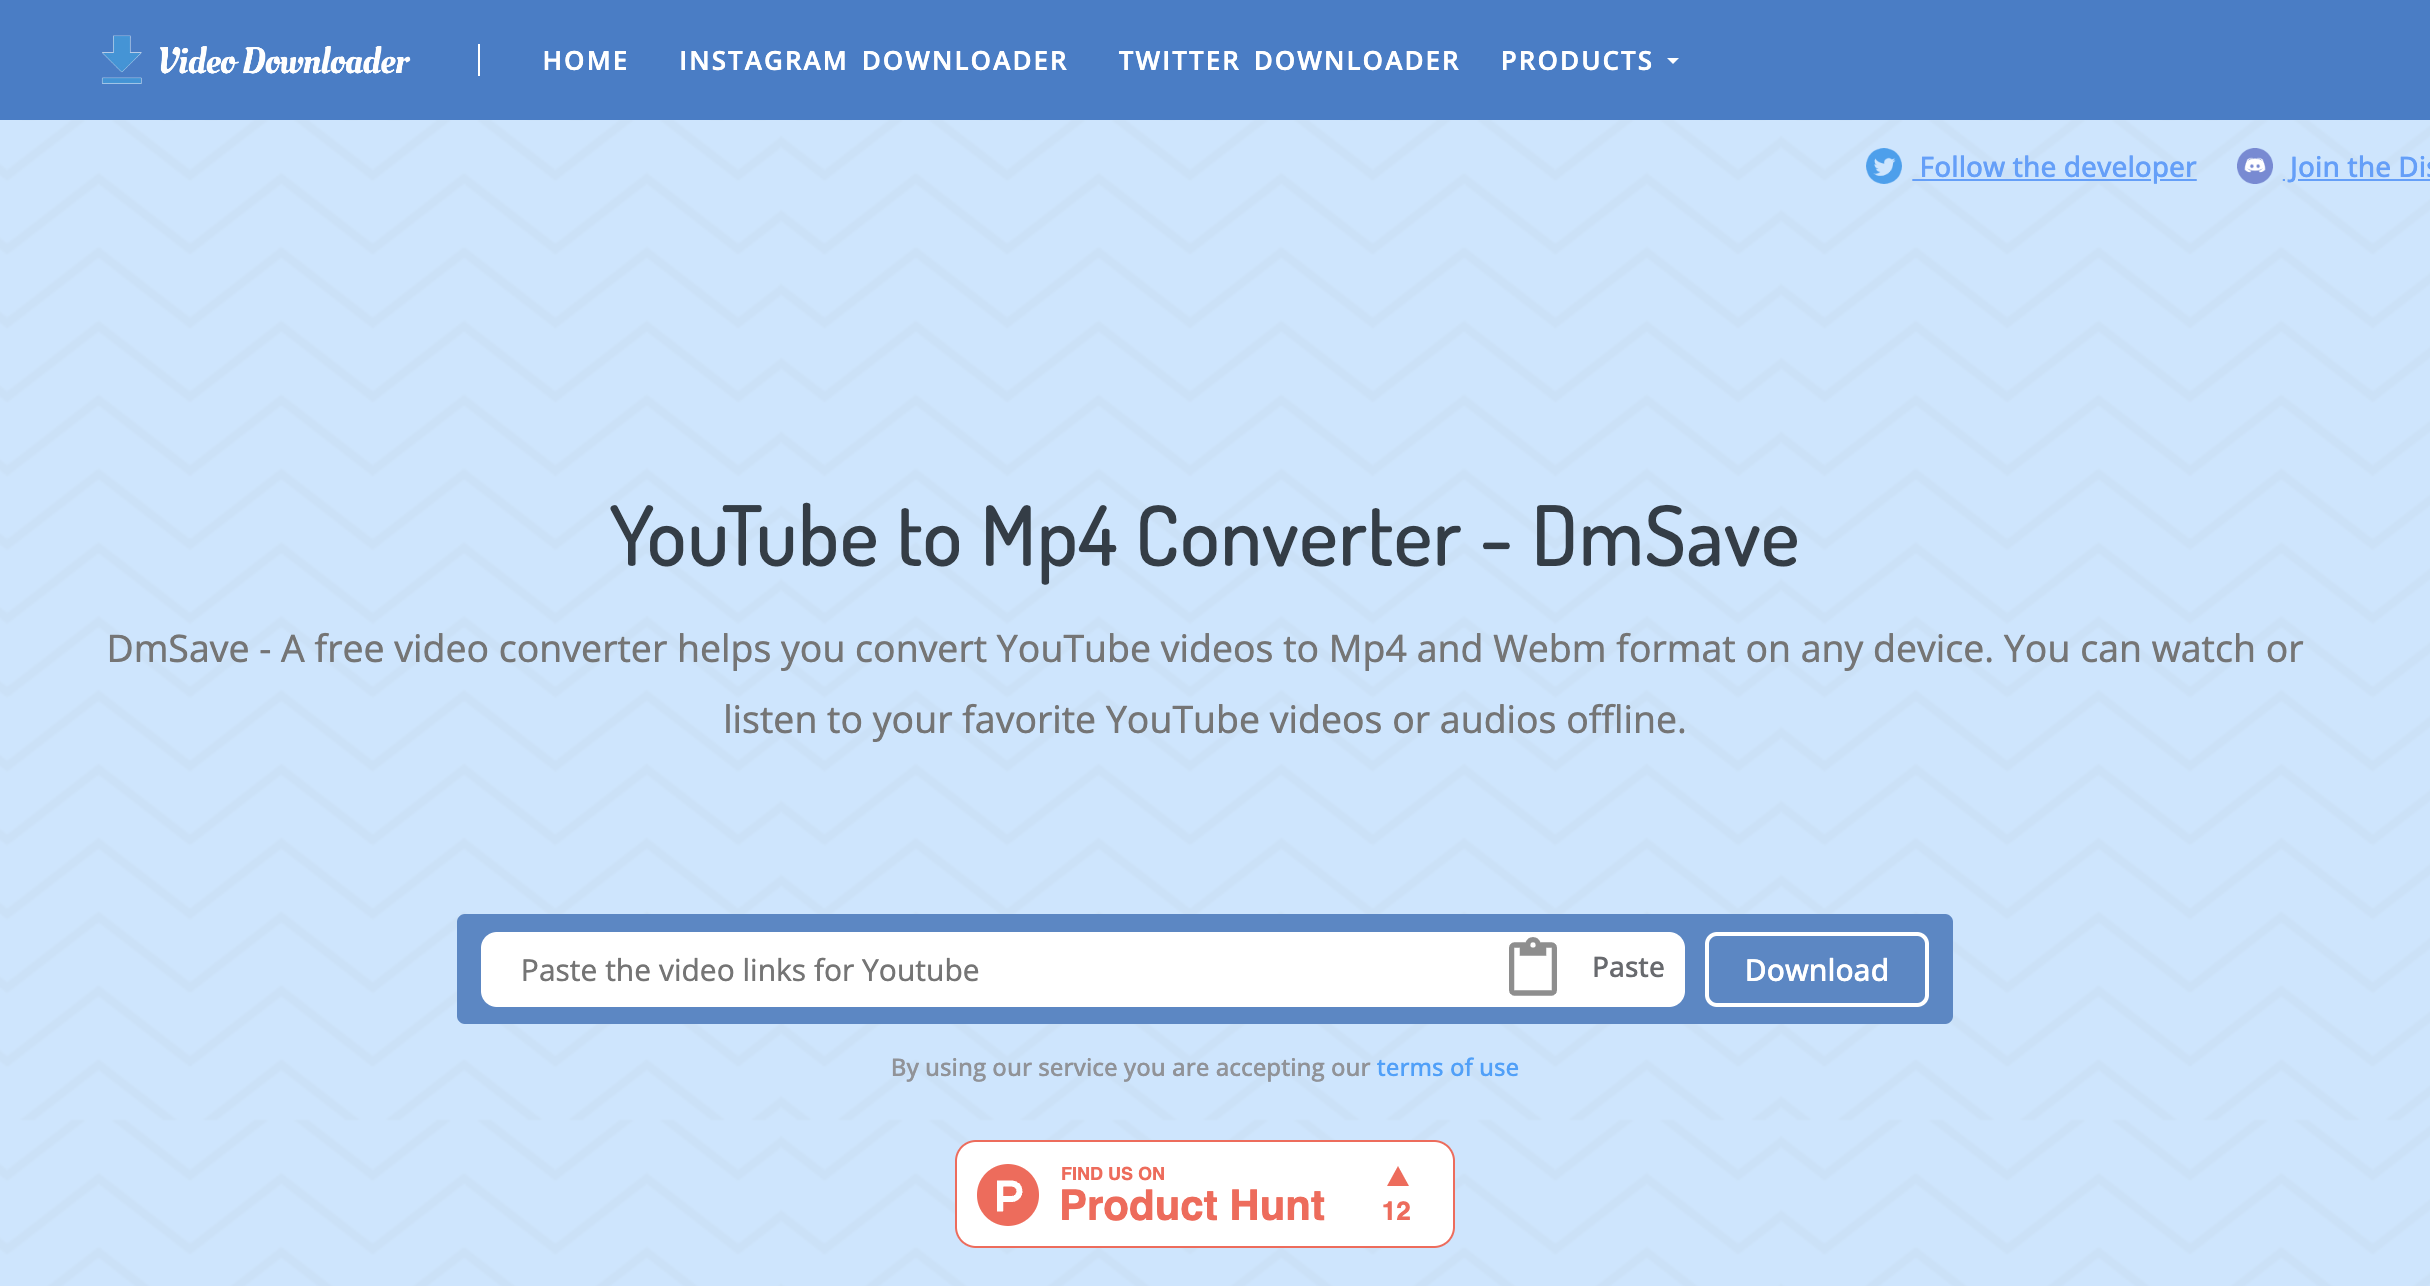 YouTube to Mp4 Converter - DmSave